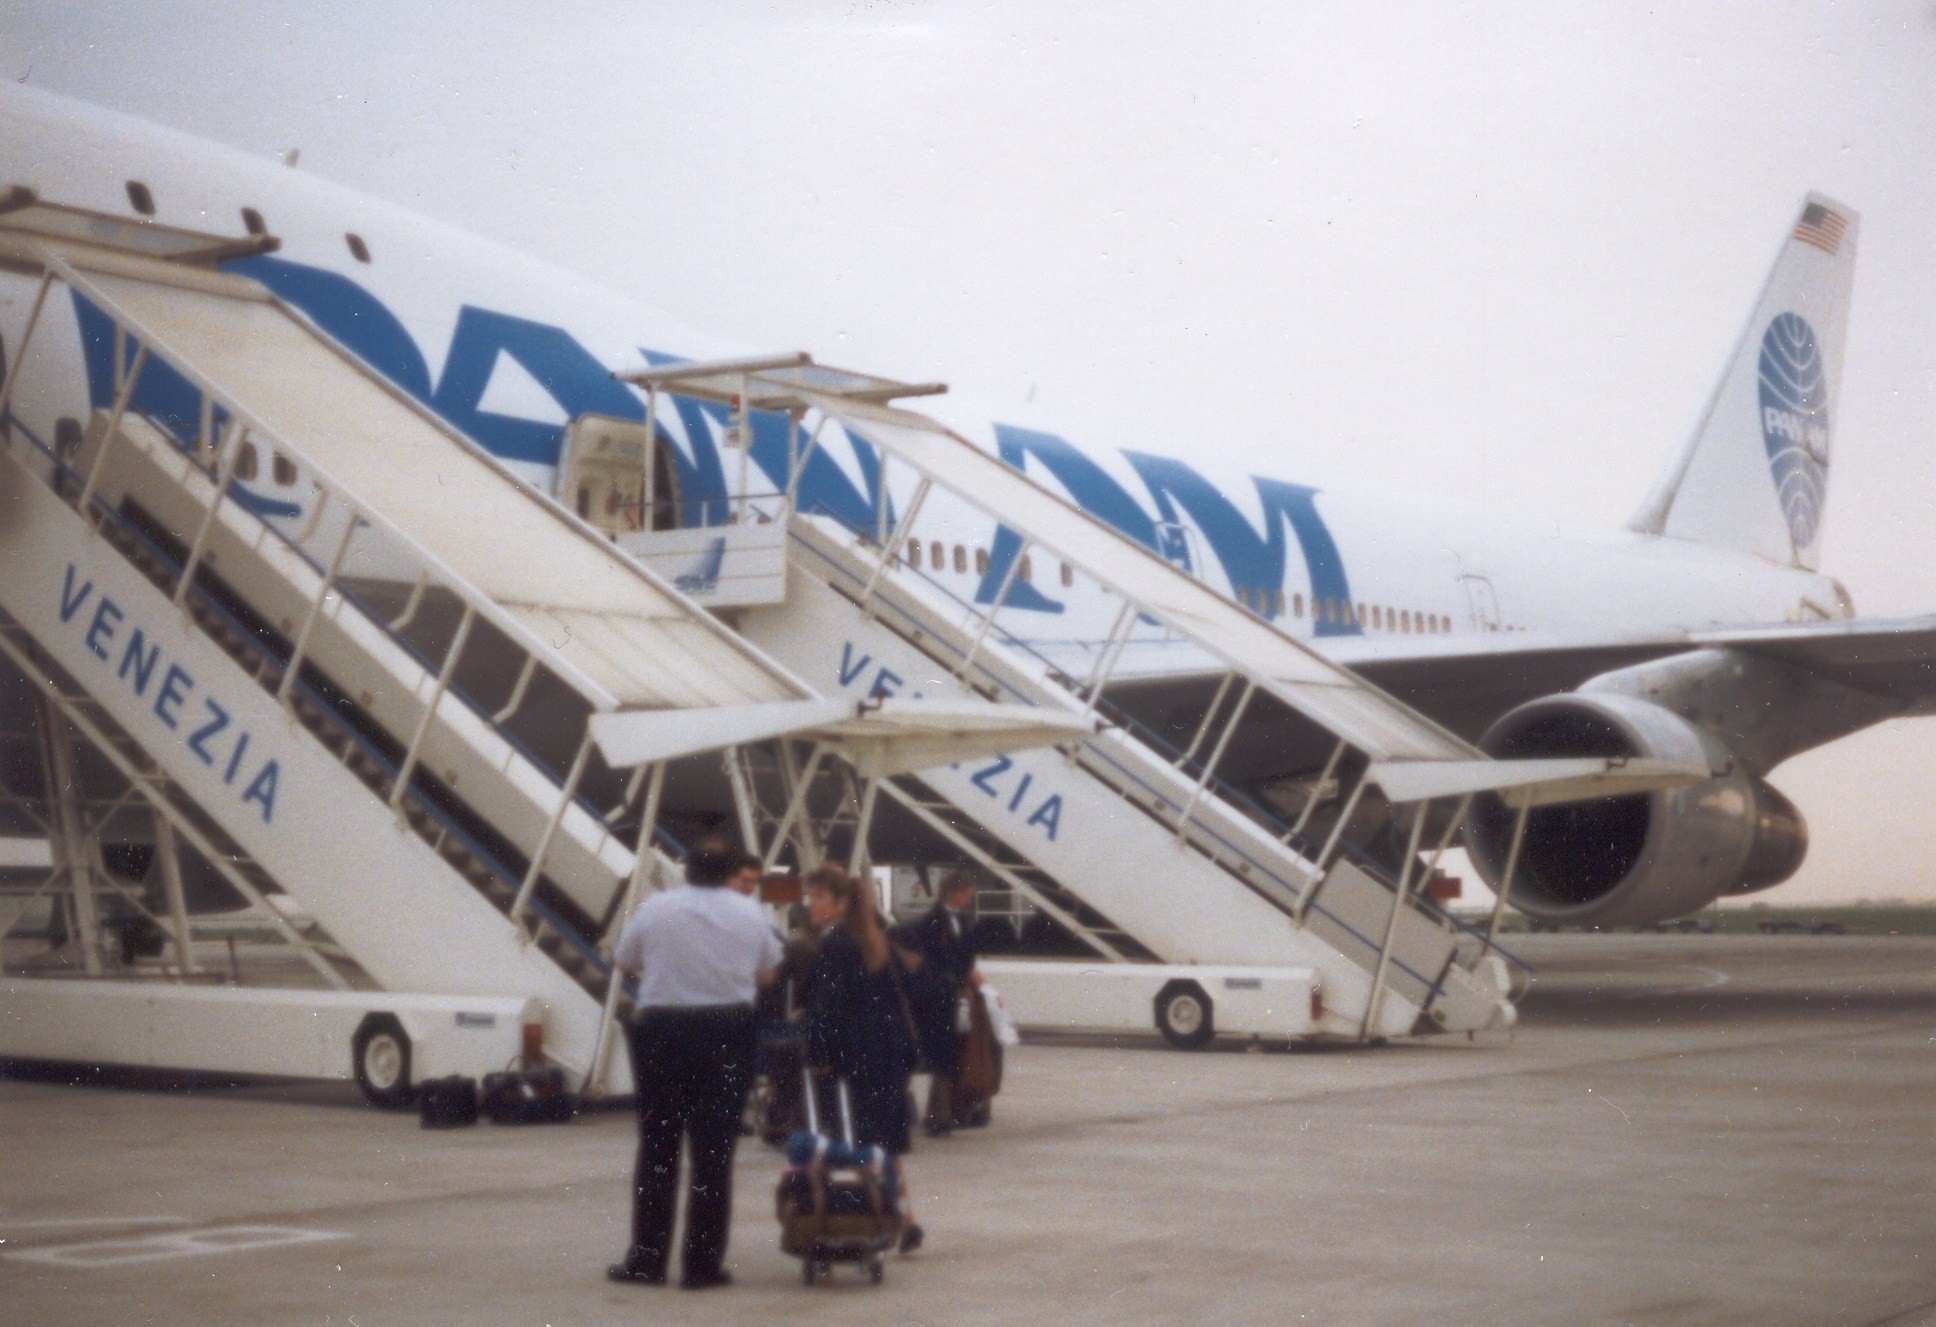 1991 Venice, Italy,  Crew memembers board a Pan Am 747 for a troop movement flight to Saudi Arabia as part of the build up for the first Gulf War.